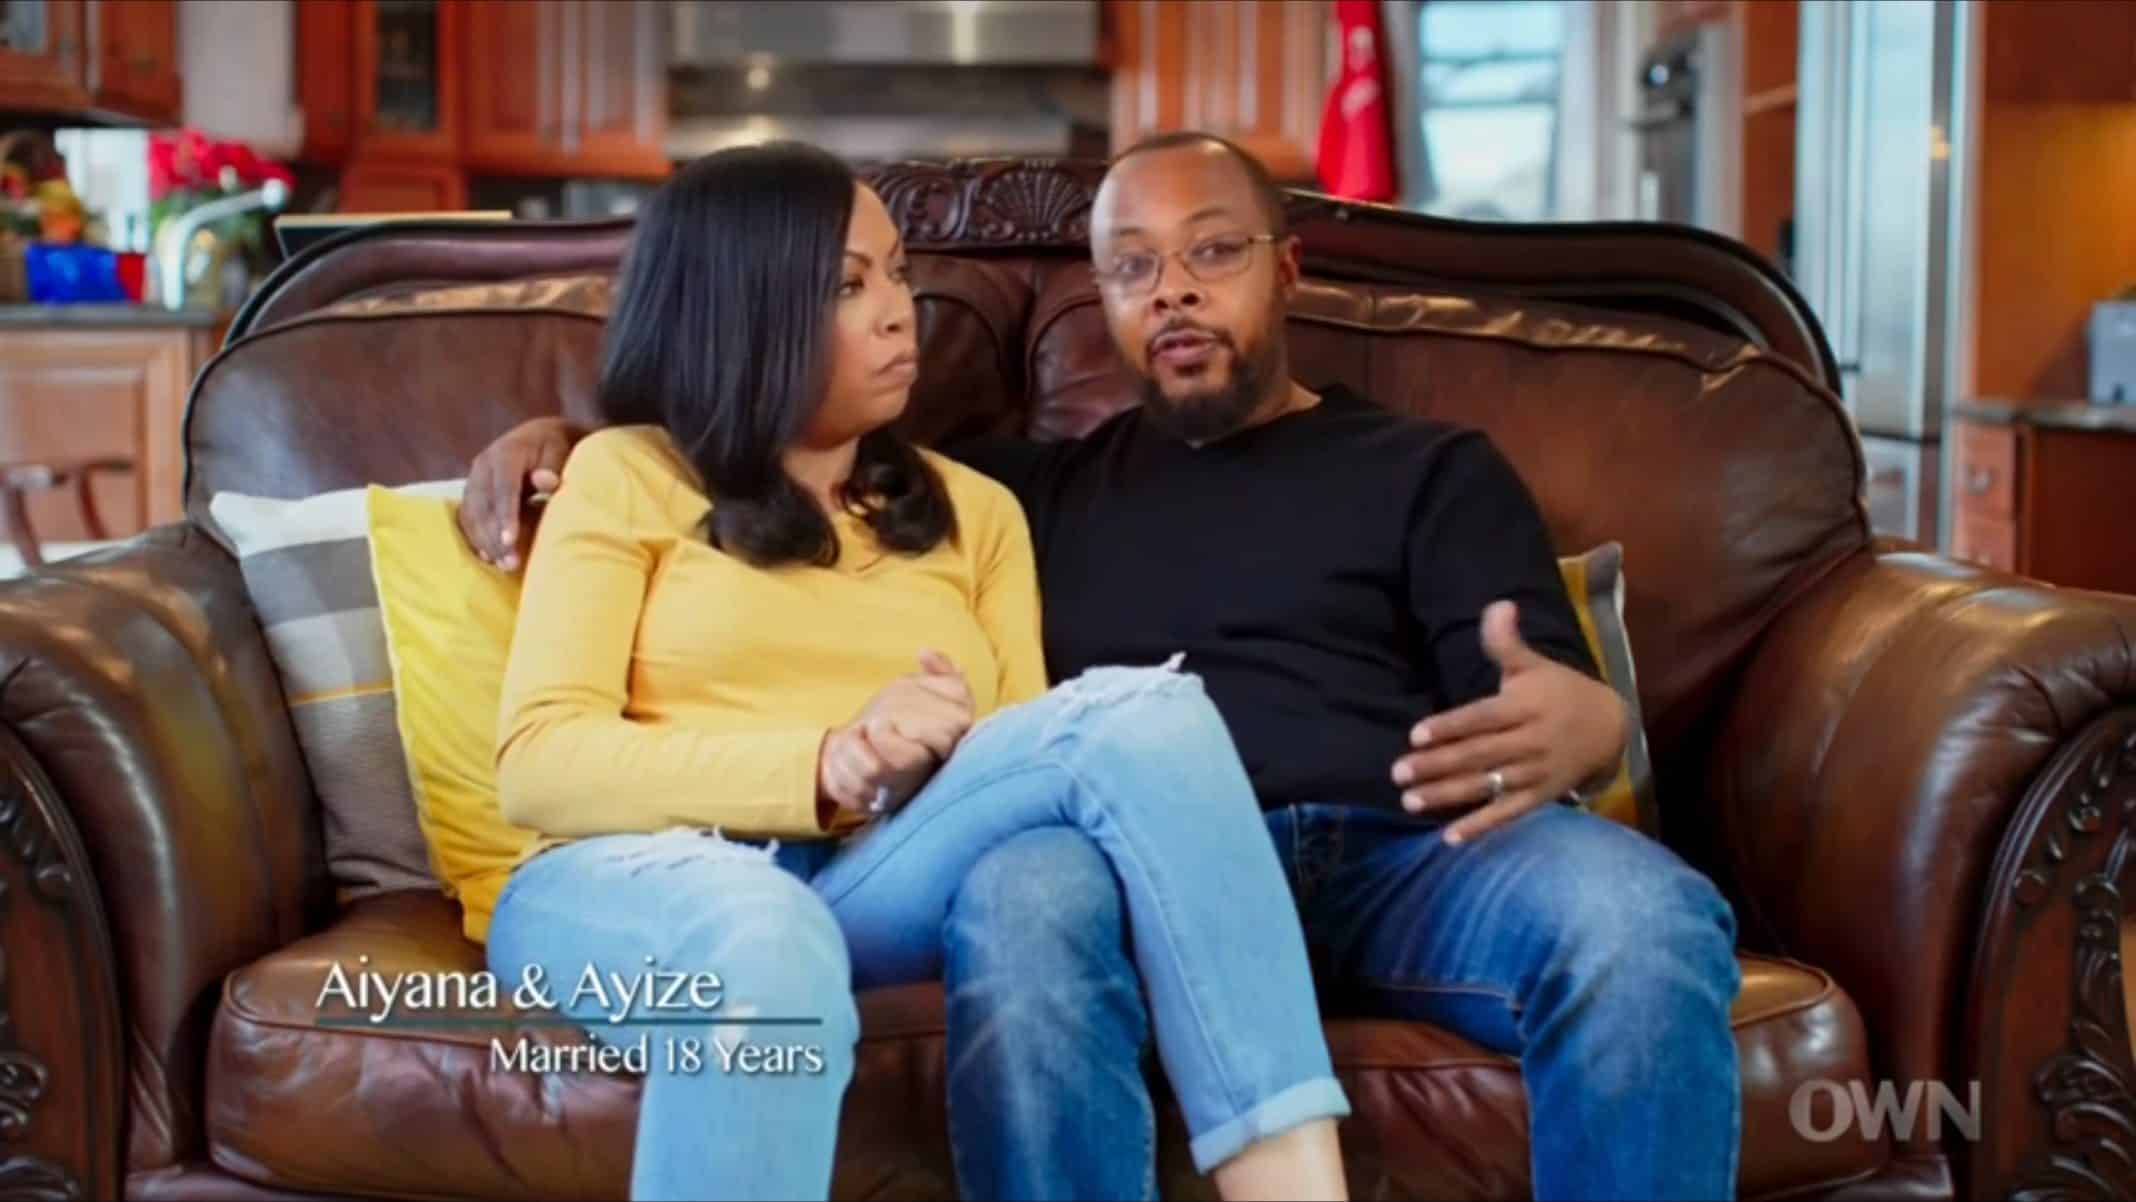 Aiyana Ma'at and Ayize Ma'at talking about their marriage.